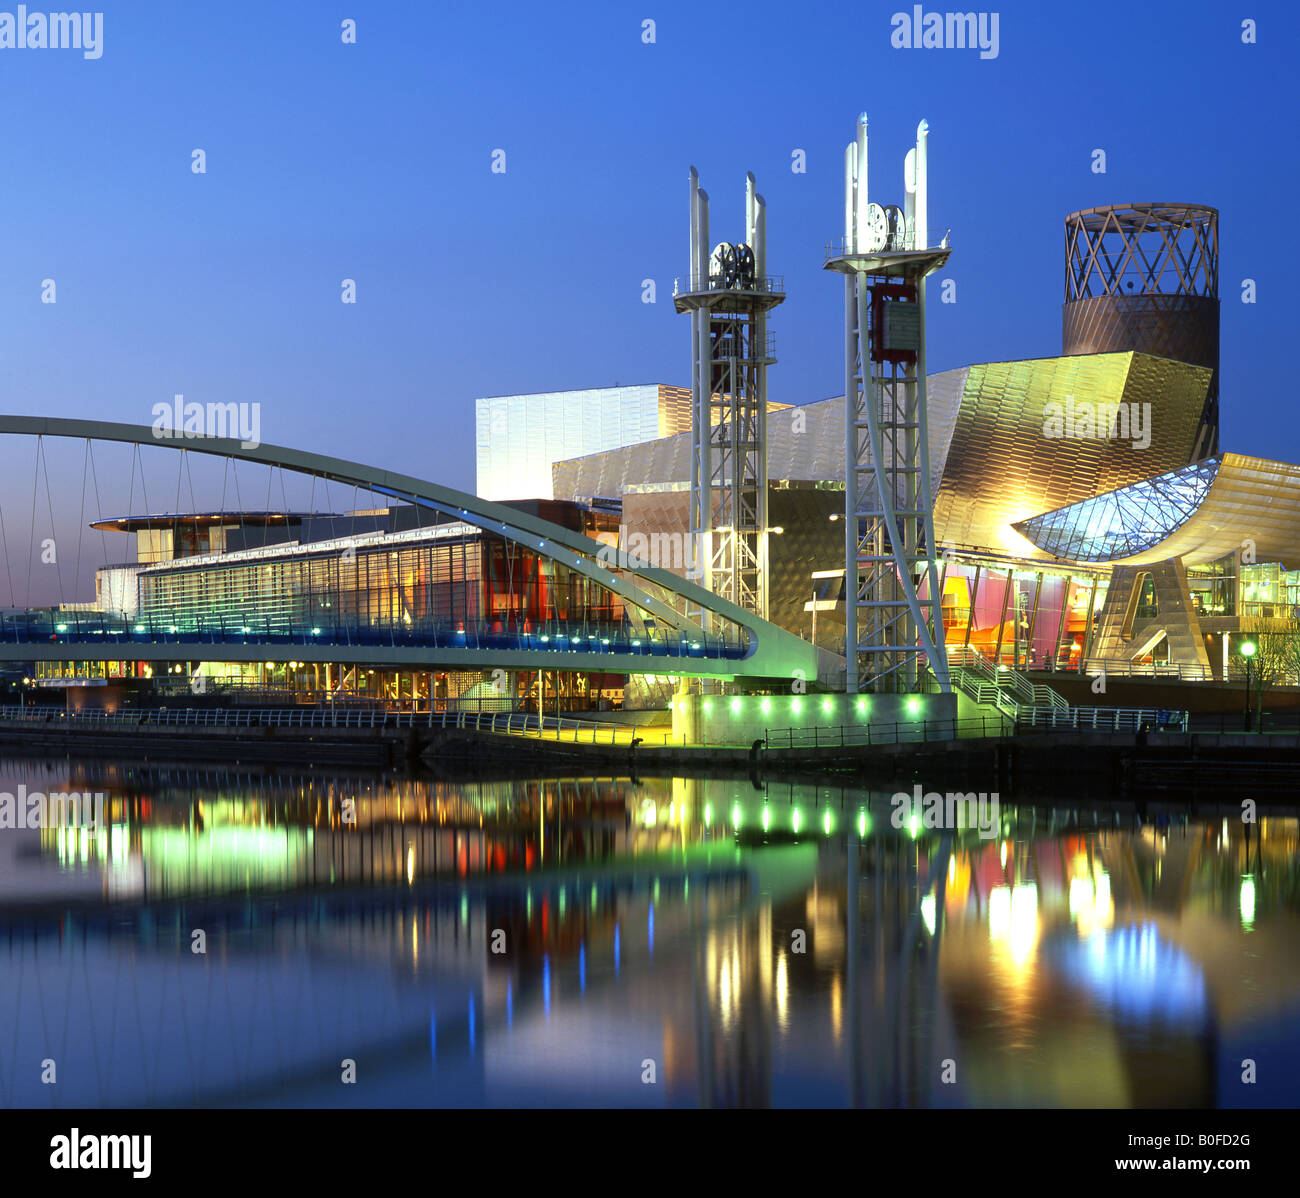 The Lowry Centre Theatre and Footbridge at Night, Salford Quays, Greater Manchester, England, UK Stock Photo